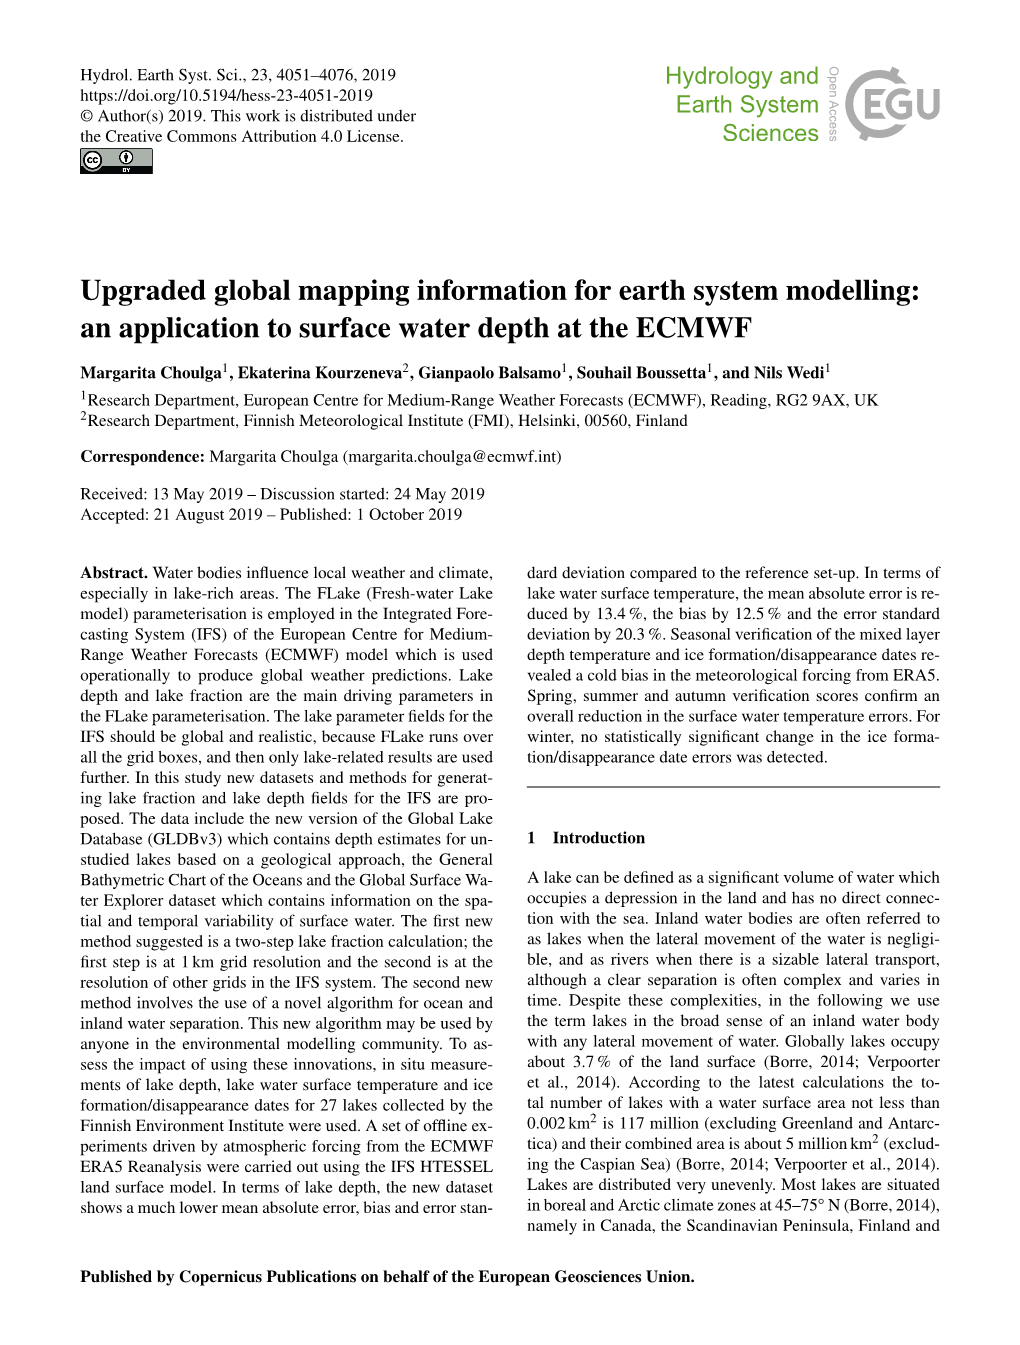 Upgraded Global Mapping Information for Earth System Modelling: an Application to Surface Water Depth at the ECMWF